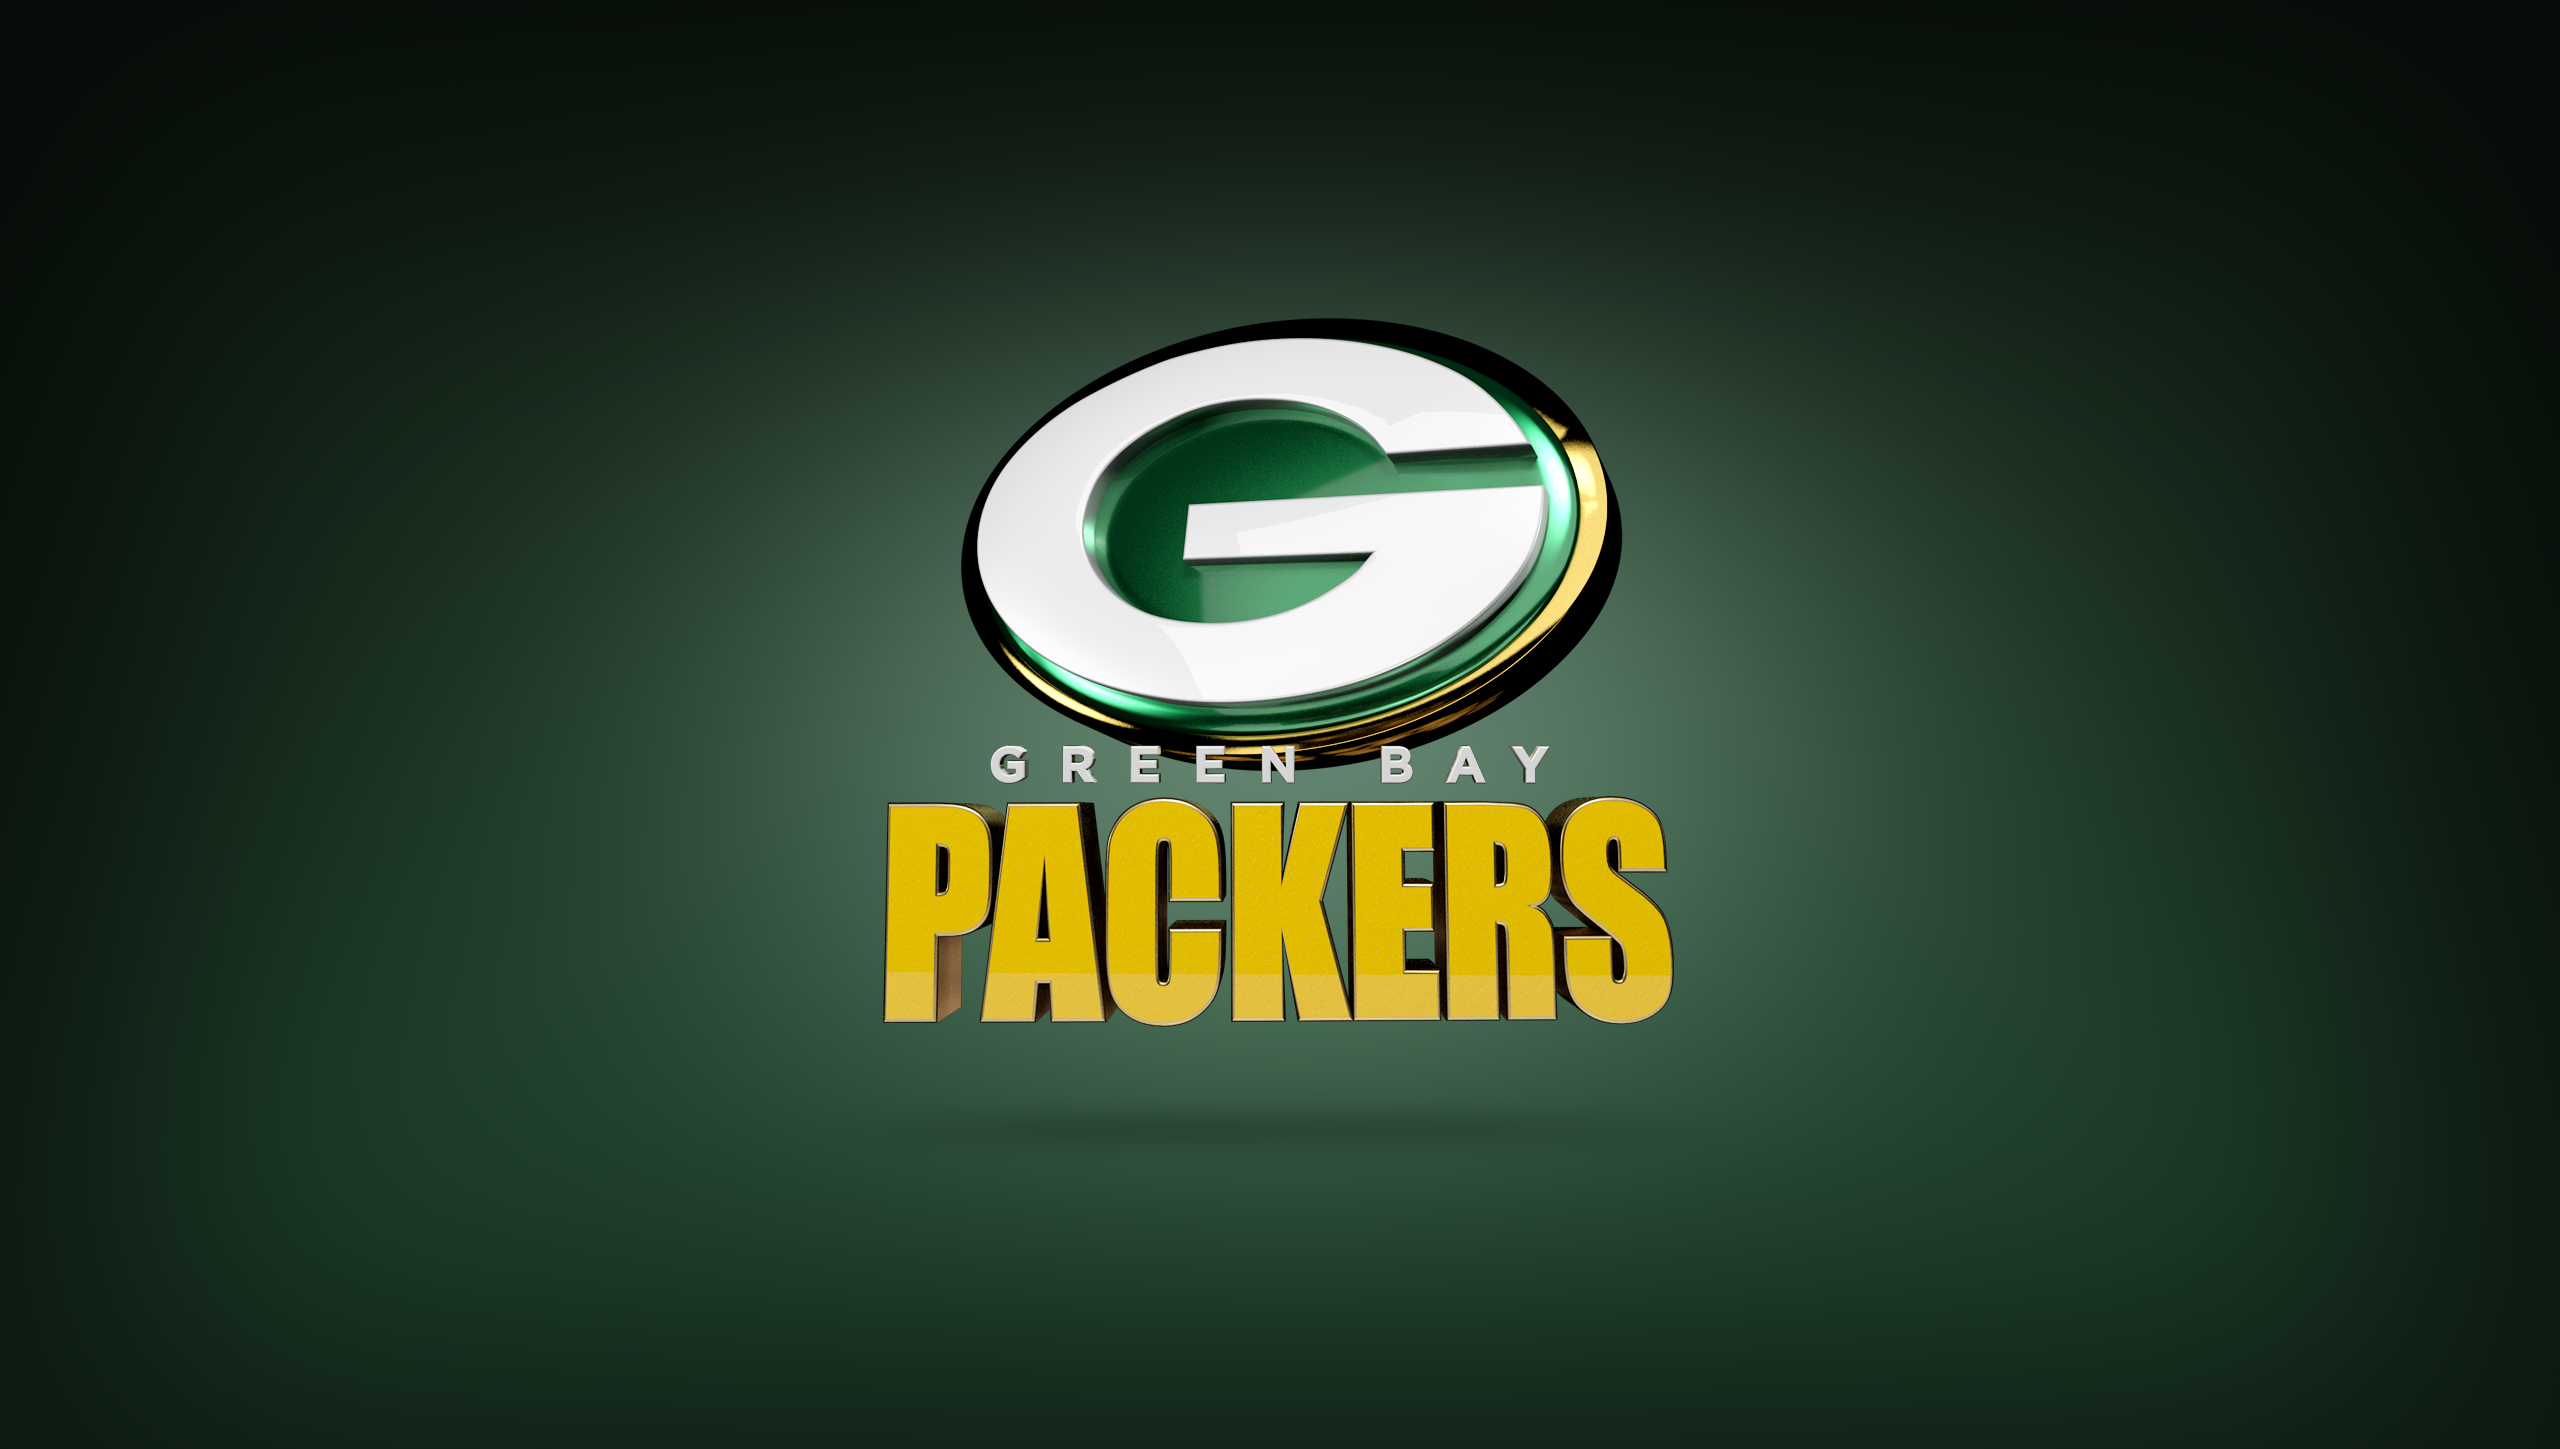 Free download Green Bay Packers Wallpaper [2560x1449] for your Desktop, Mobile & Tablet. Explore Green Bay Packers 2017 Wallpaper. Green Bay Packers 2017 Wallpaper, Green Bay Packers Wallpaper, Green Bay Packers Wallpaper